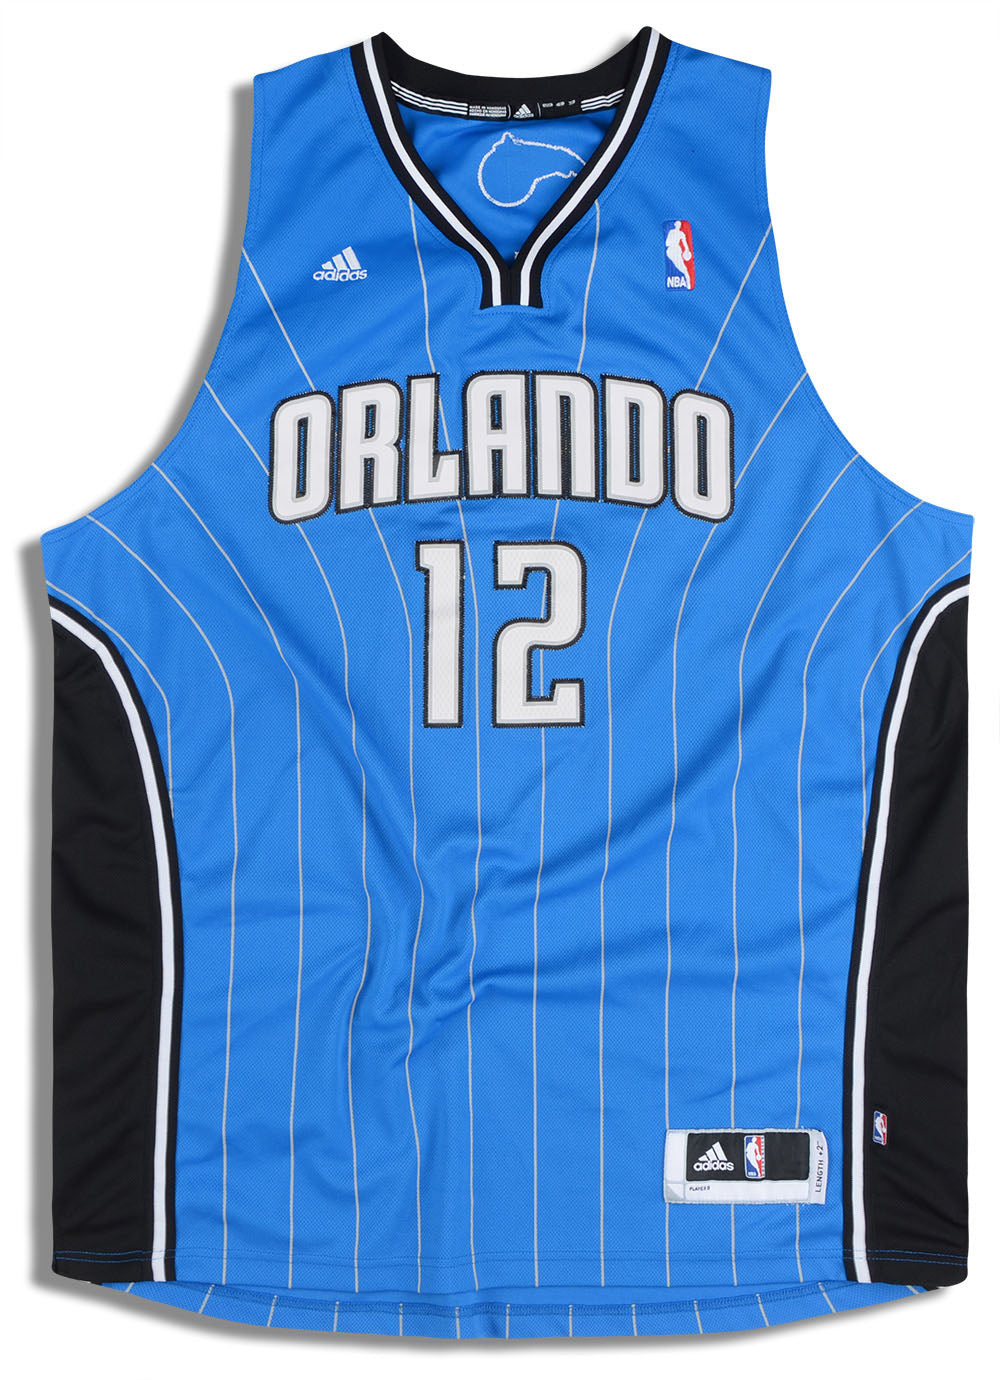 🏀 Dwight Howard Orlando Magic Jersey Size Small – The Throwback Store 🏀